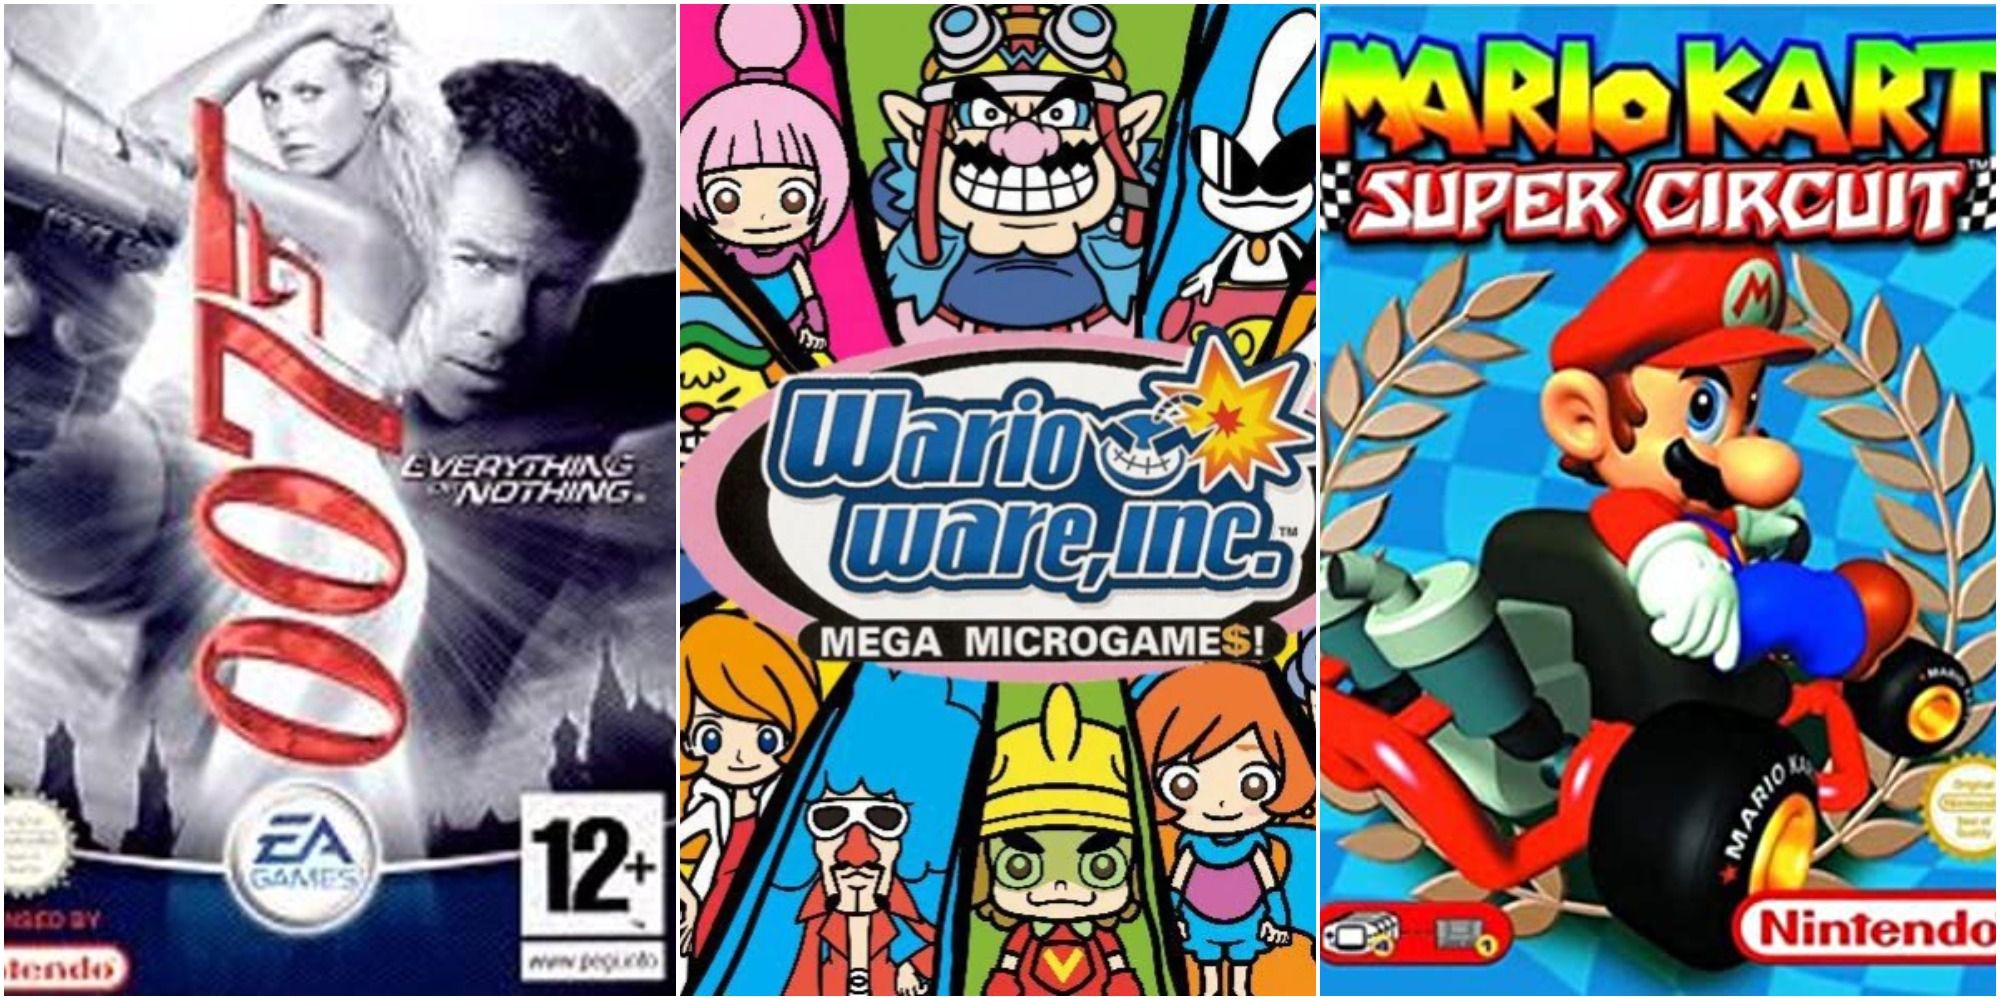 10 Game Boy Advance Games That Were Way Ahead Of Their Time